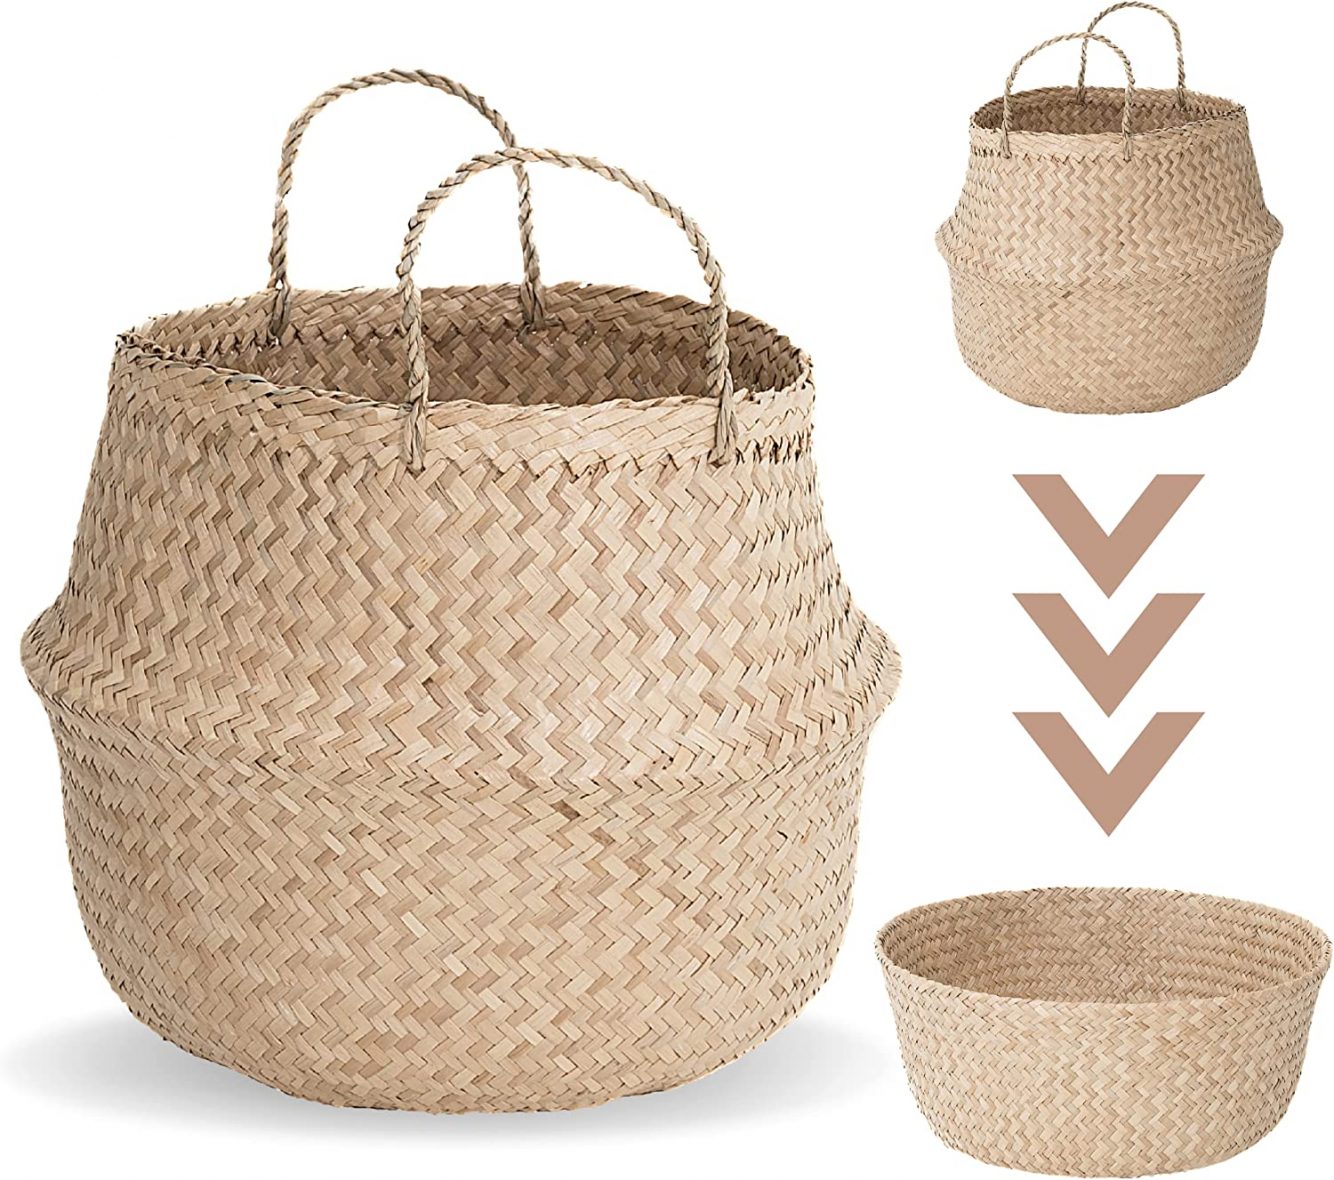 House & Home Patterned Seagrass Basket – Natural1